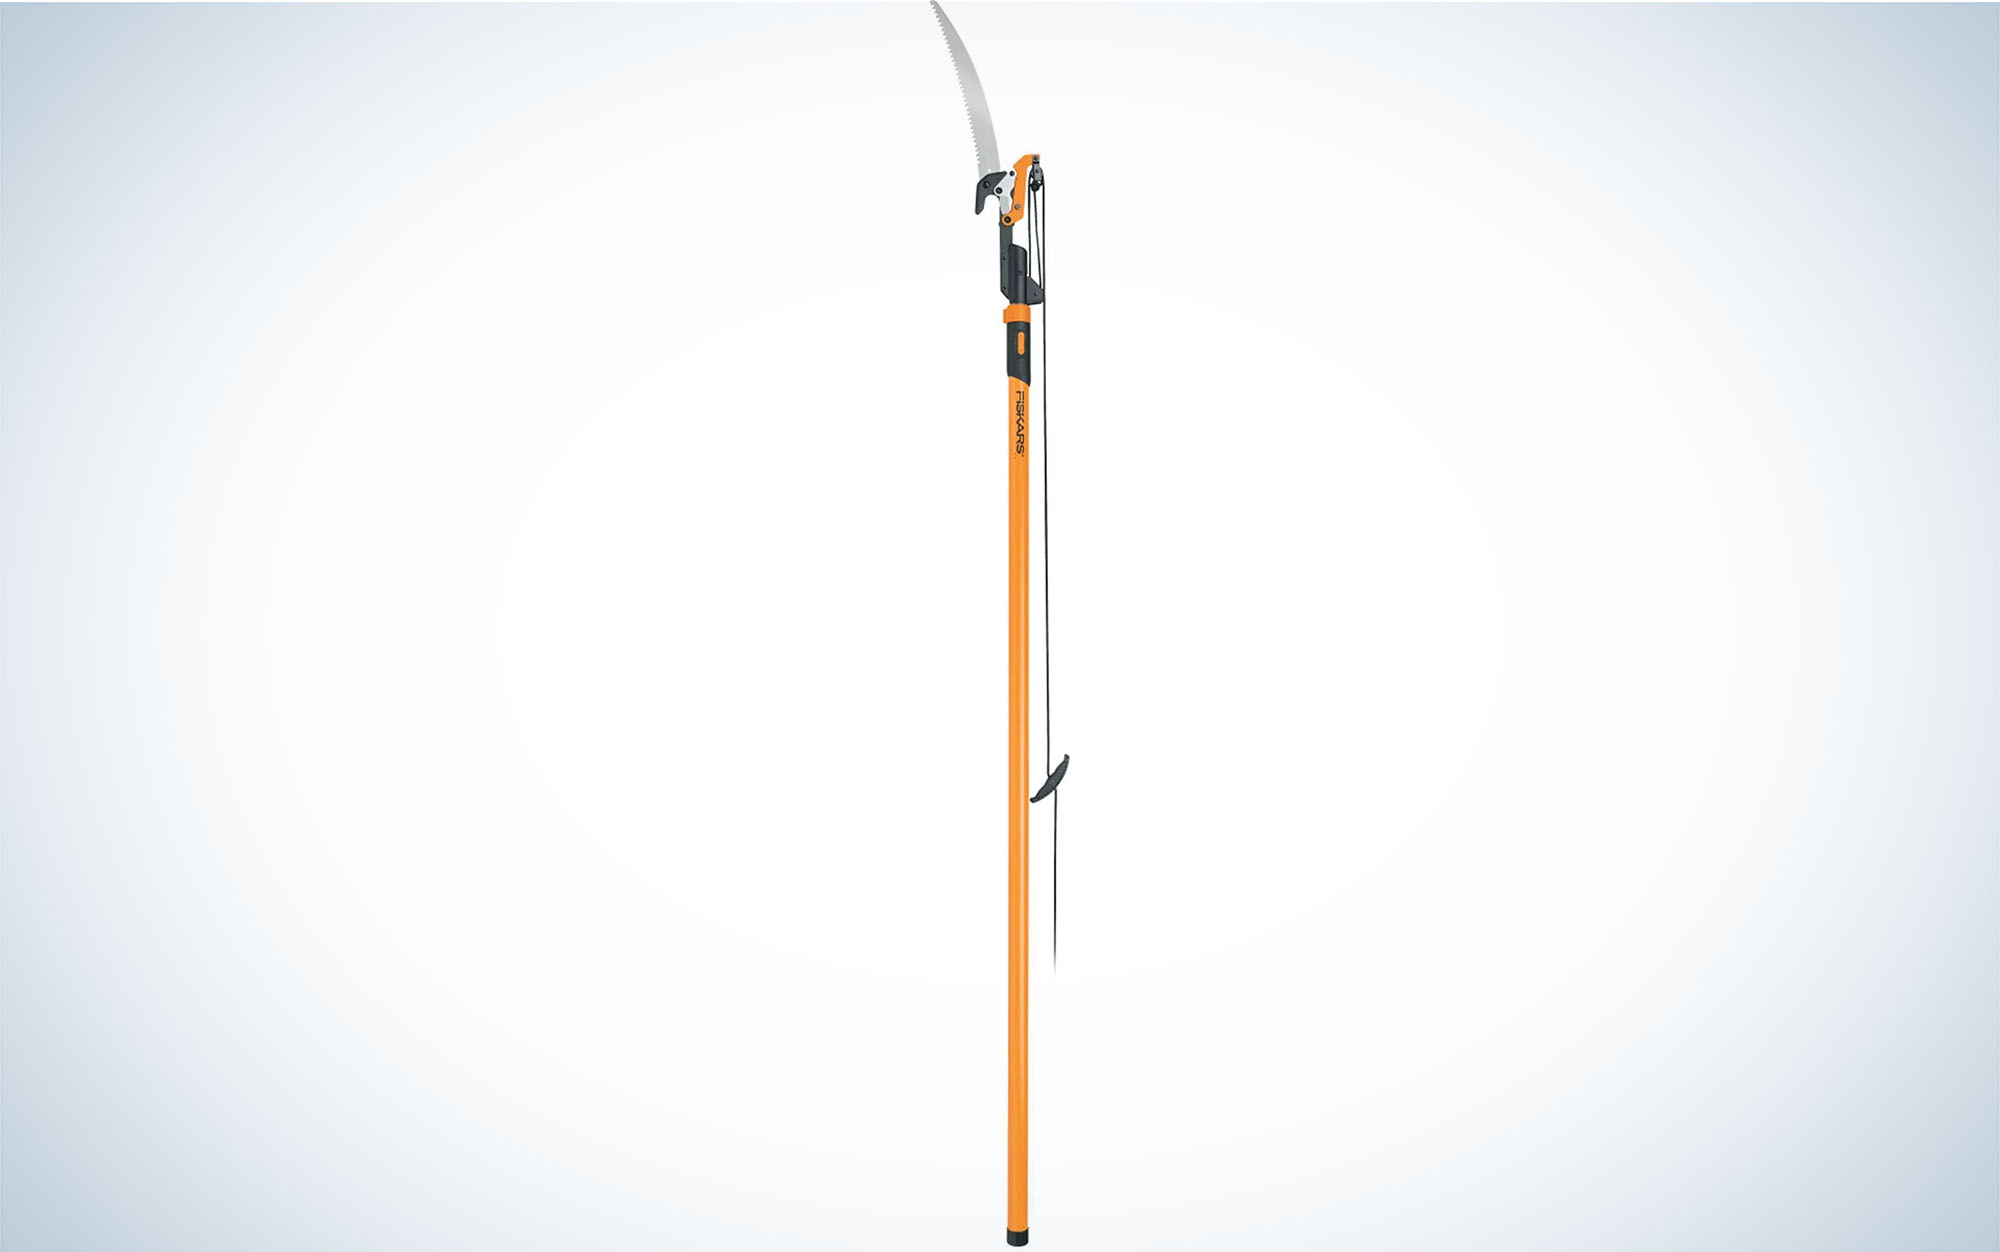 The Fiskars Extendable Tree Pruner and Pole SawÂ  is one of the best pole saws.